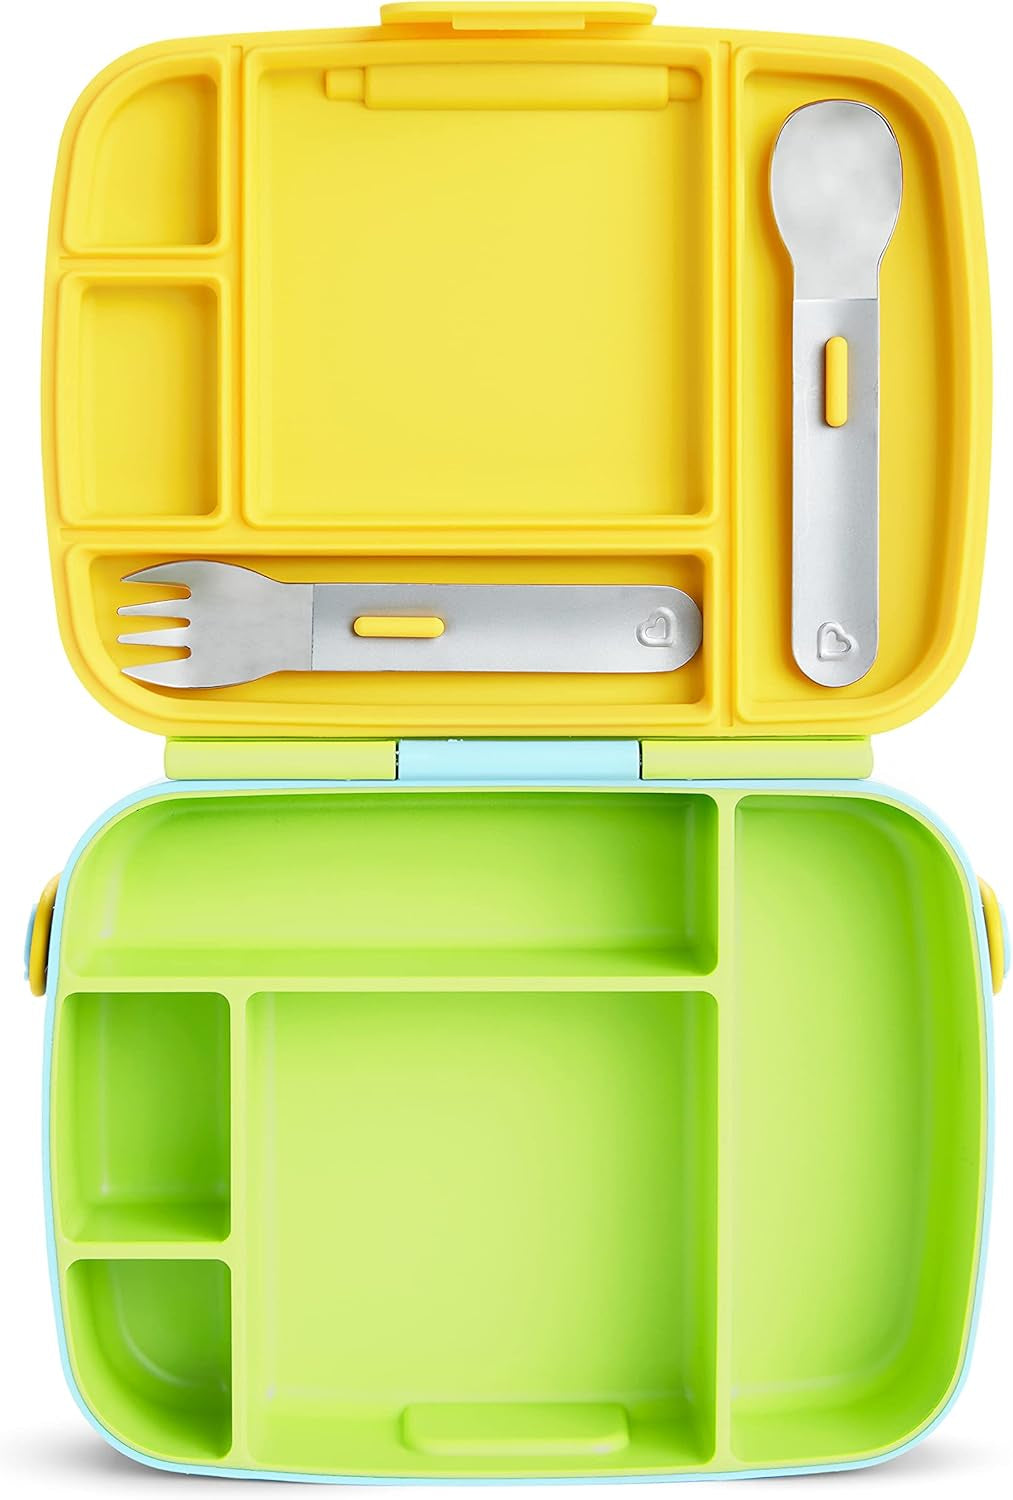 ® Lunch™ Bento Box for Kids, Includes Utensils, Green